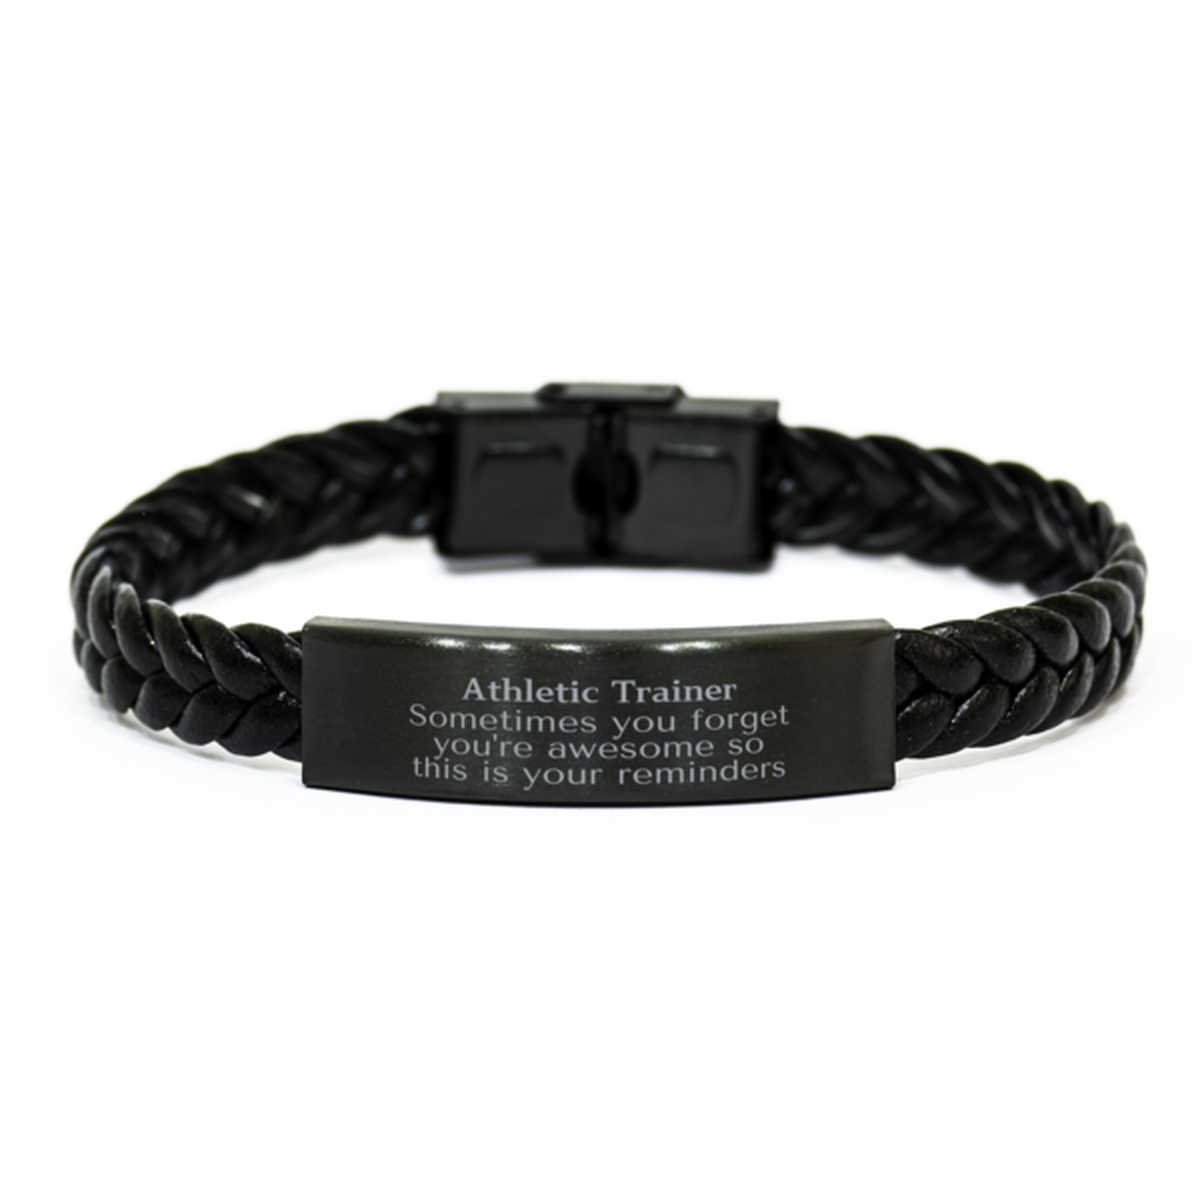 Sentimental Athletic Trainer Braided Leather Bracelet, Athletic Trainer Sometimes you forget you're awesome so this is your reminders, Graduation Christmas Birthday Gifts for Athletic Trainer, Men, Women, Coworkers